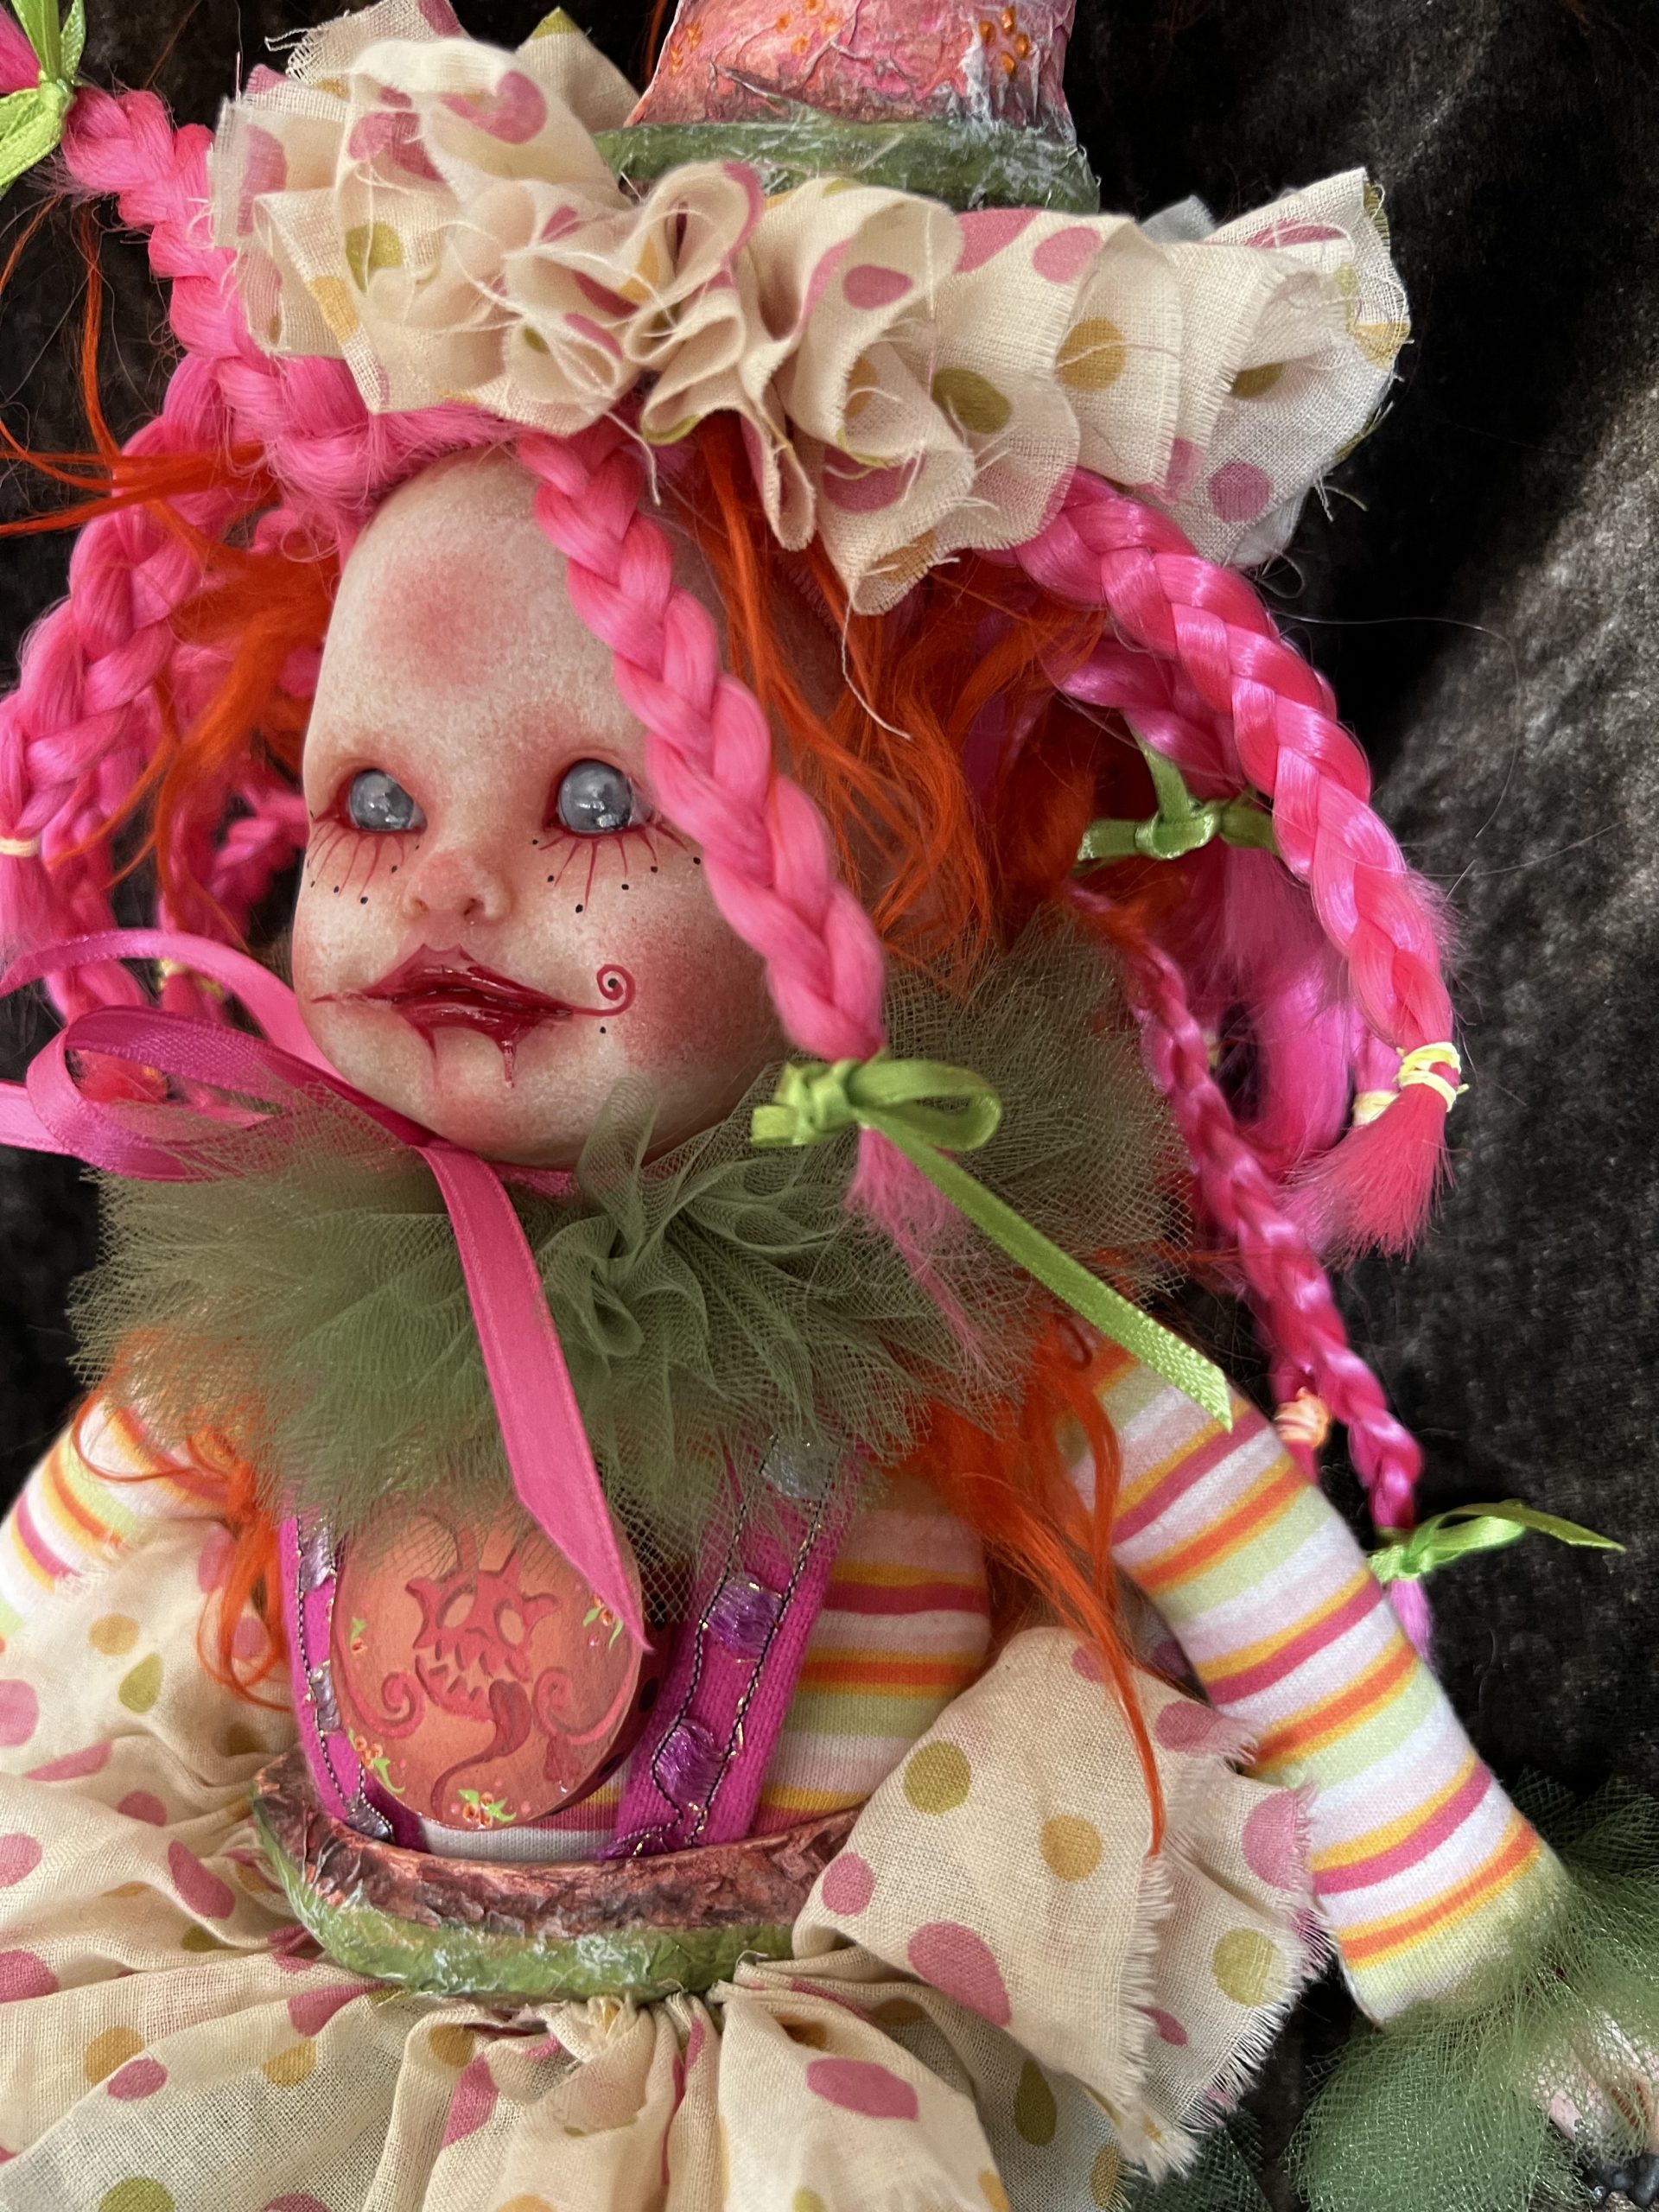 close up one of a kind pink and green artdoll inspired by paintings of Michael Hussar gothic creepy clown ornament